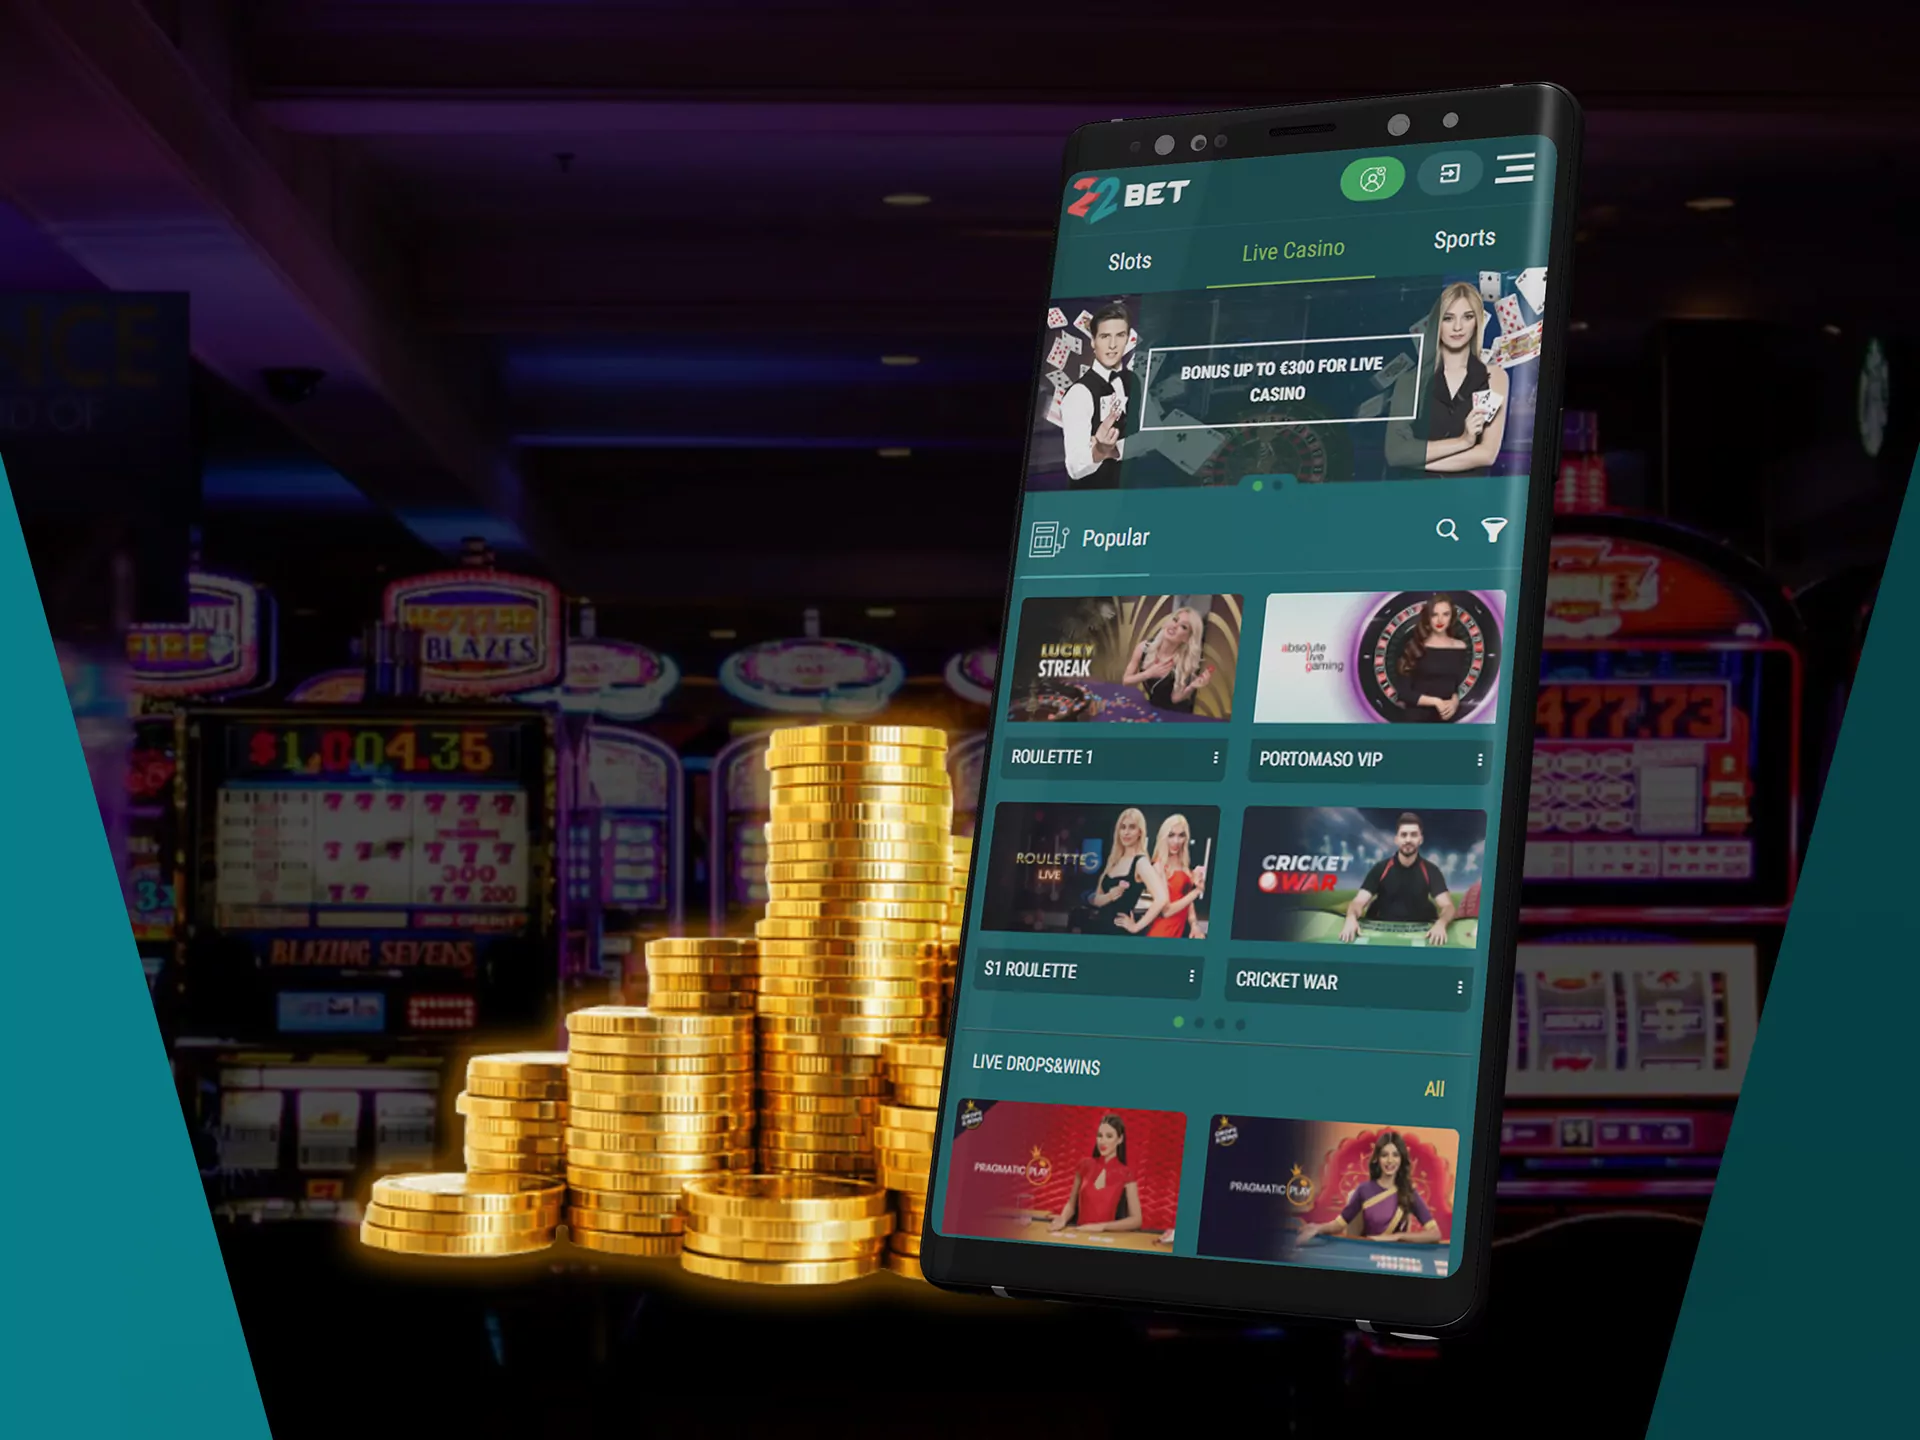 Play and win money at 22bet casino.